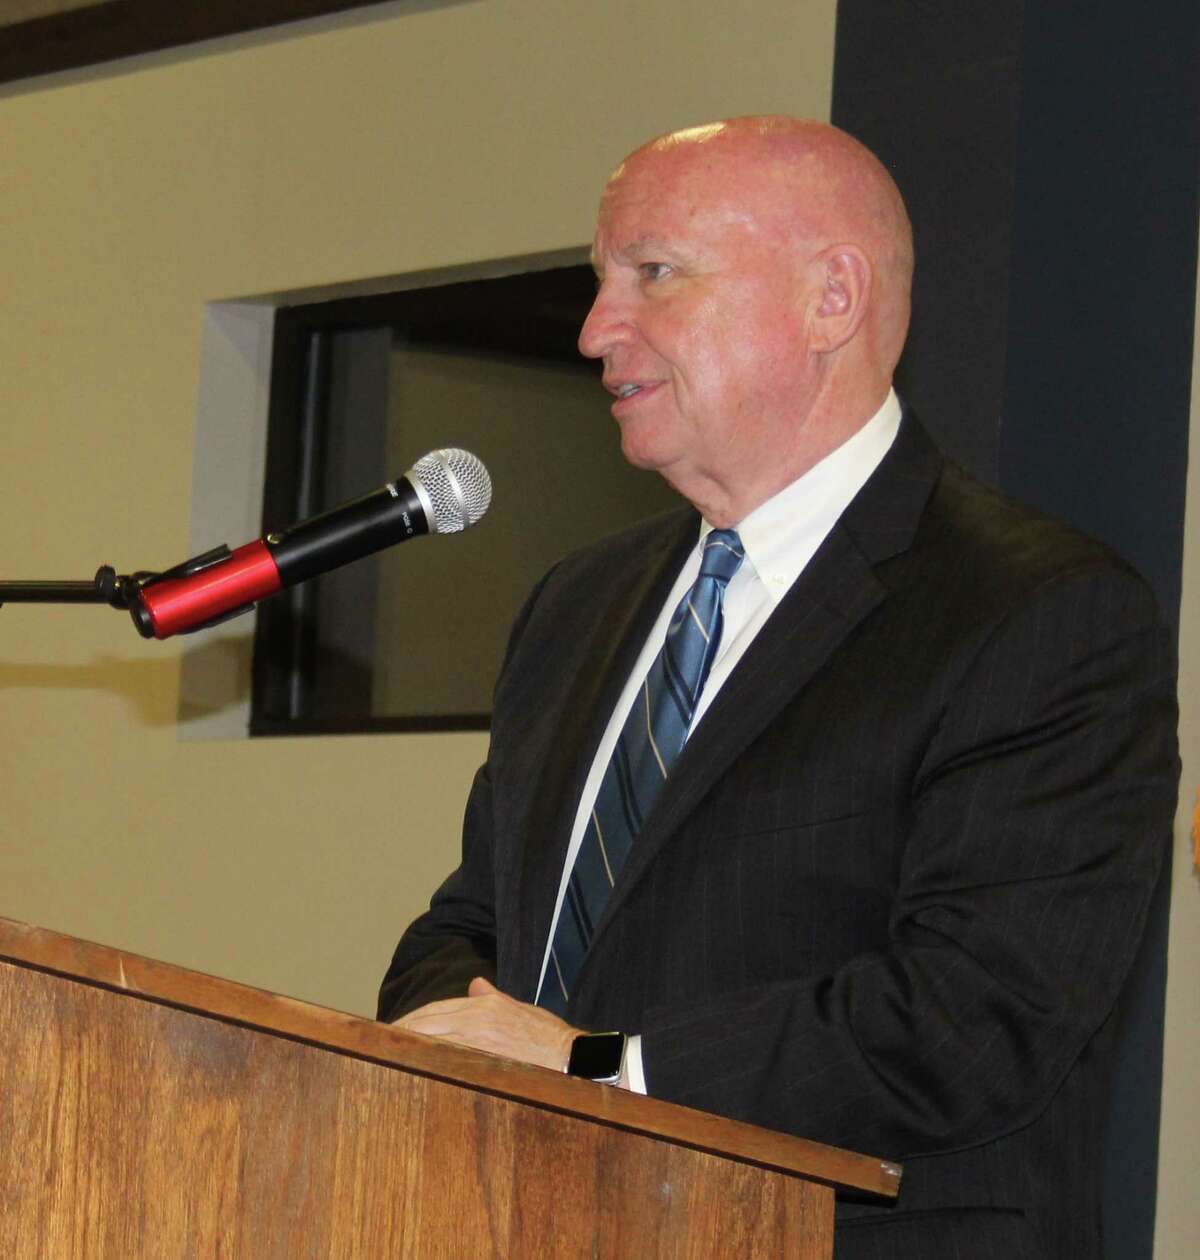 U. S. Representative of Texas Kevin Brady discusses the tax reform at the San Jacinto County Republican Party's Reagan Dinner on Feb. 17.